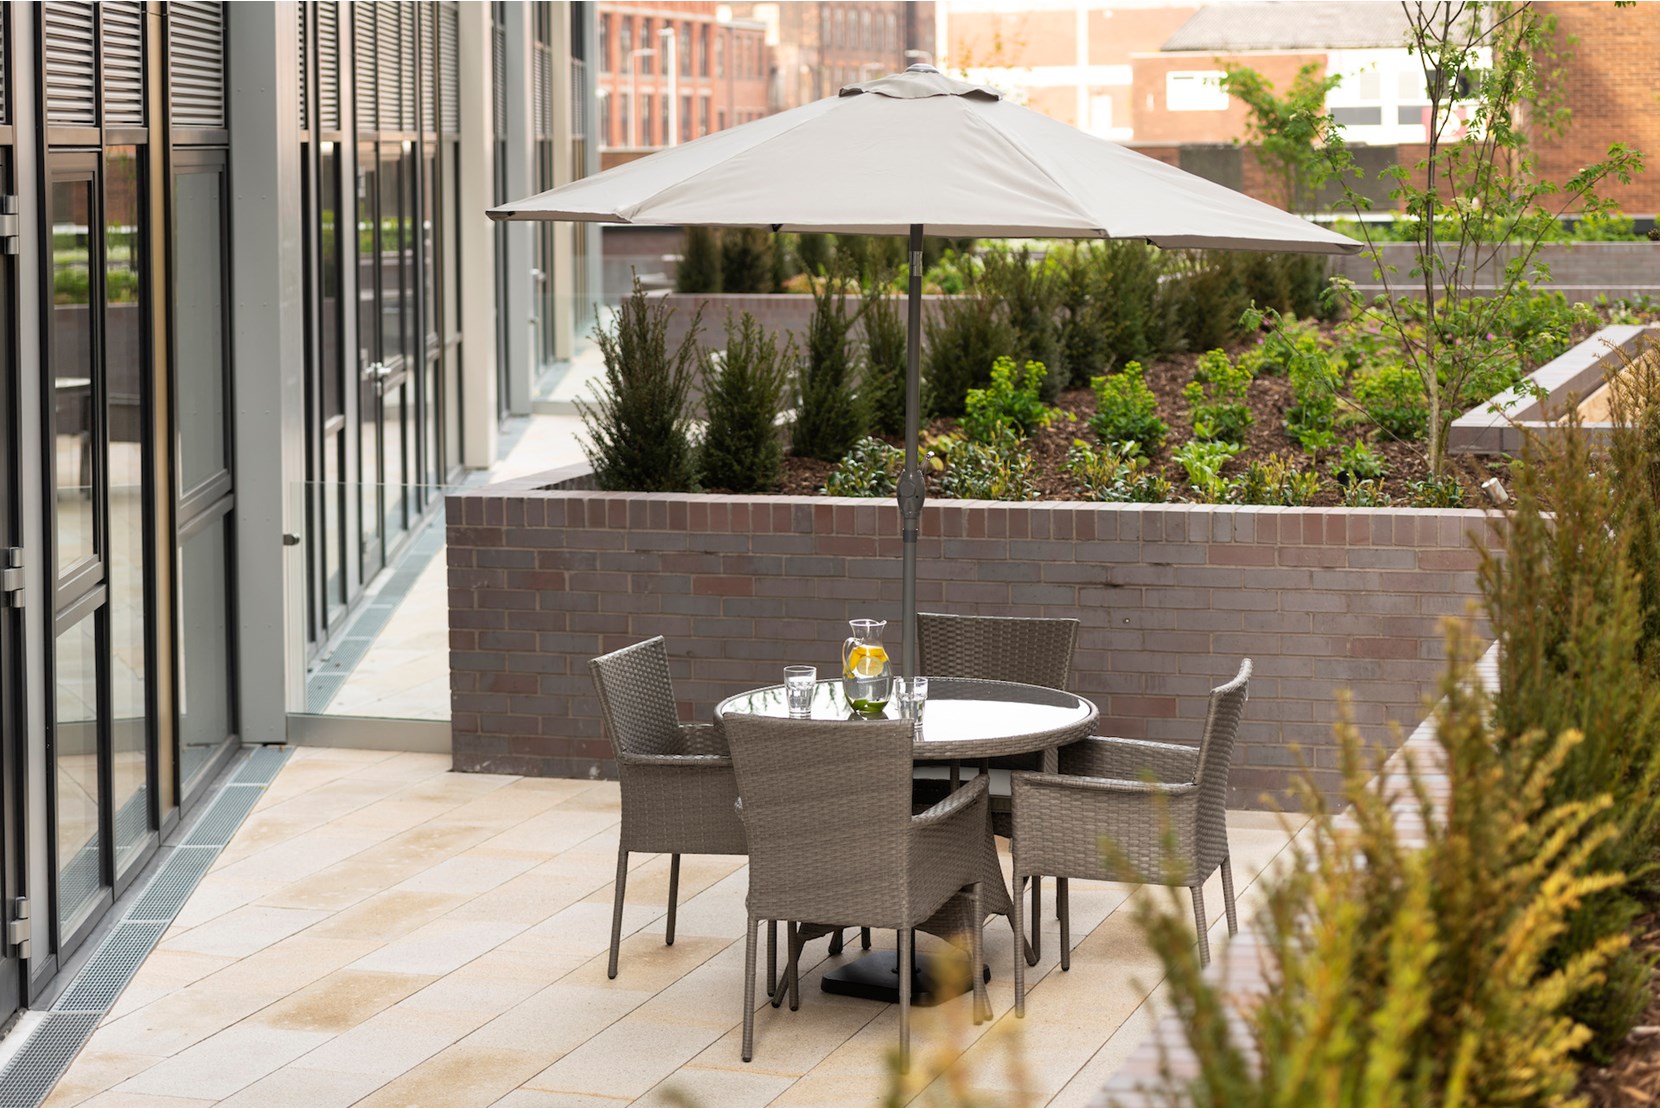 Apartments to Rent by Allsop at The Trilogy, Manchester, M15, communal gardens